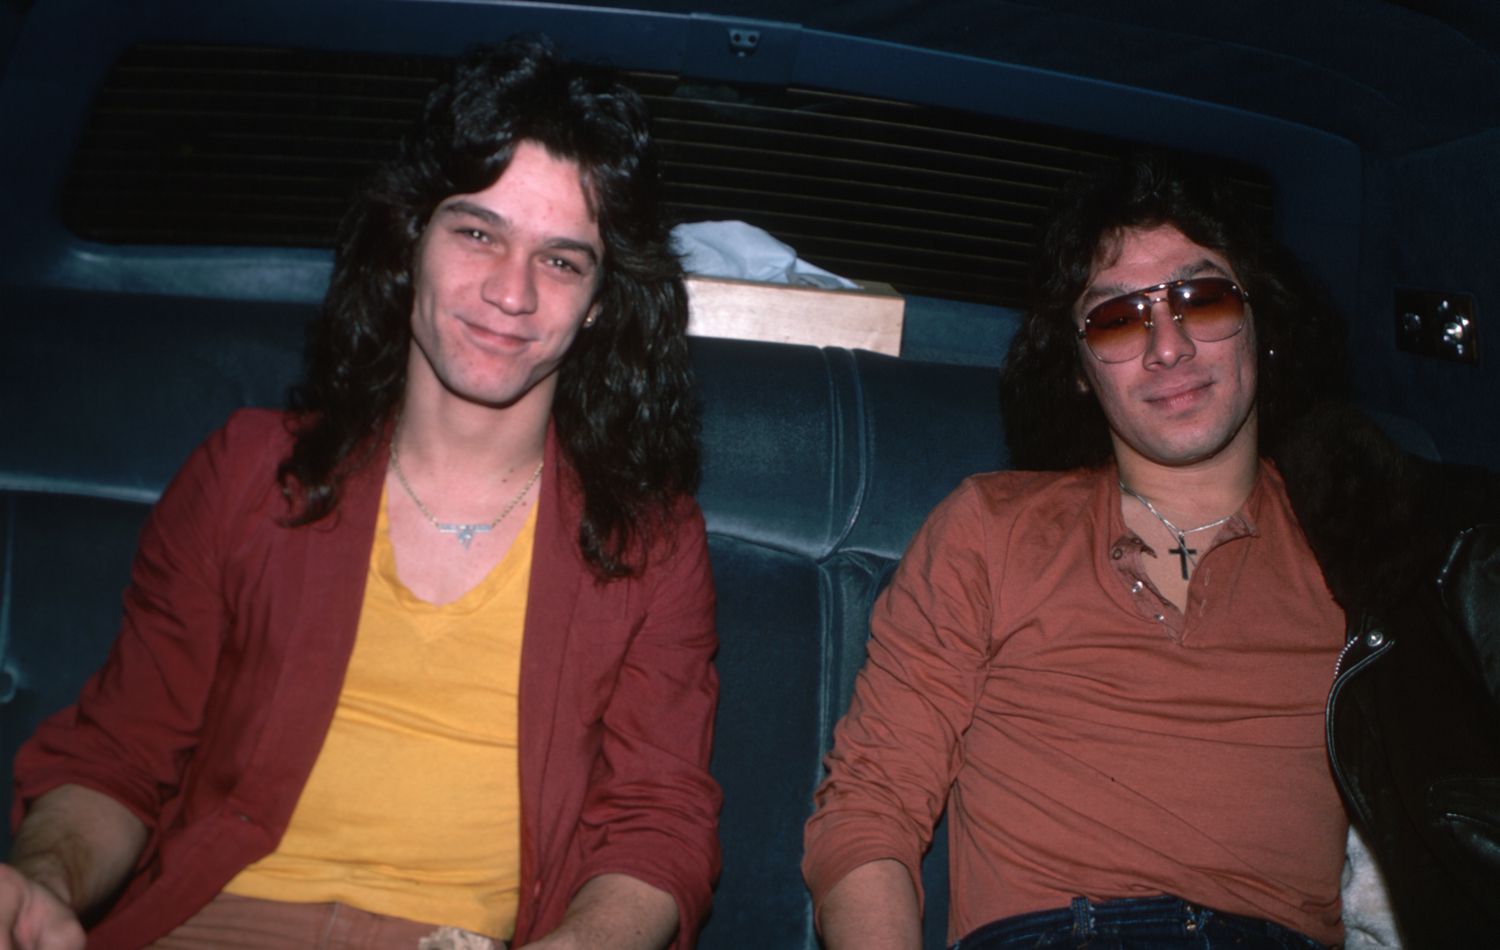 Informal portrait of Eddie and Alex Van Halen. They are shown waist-up, in the back seat of an automobile.